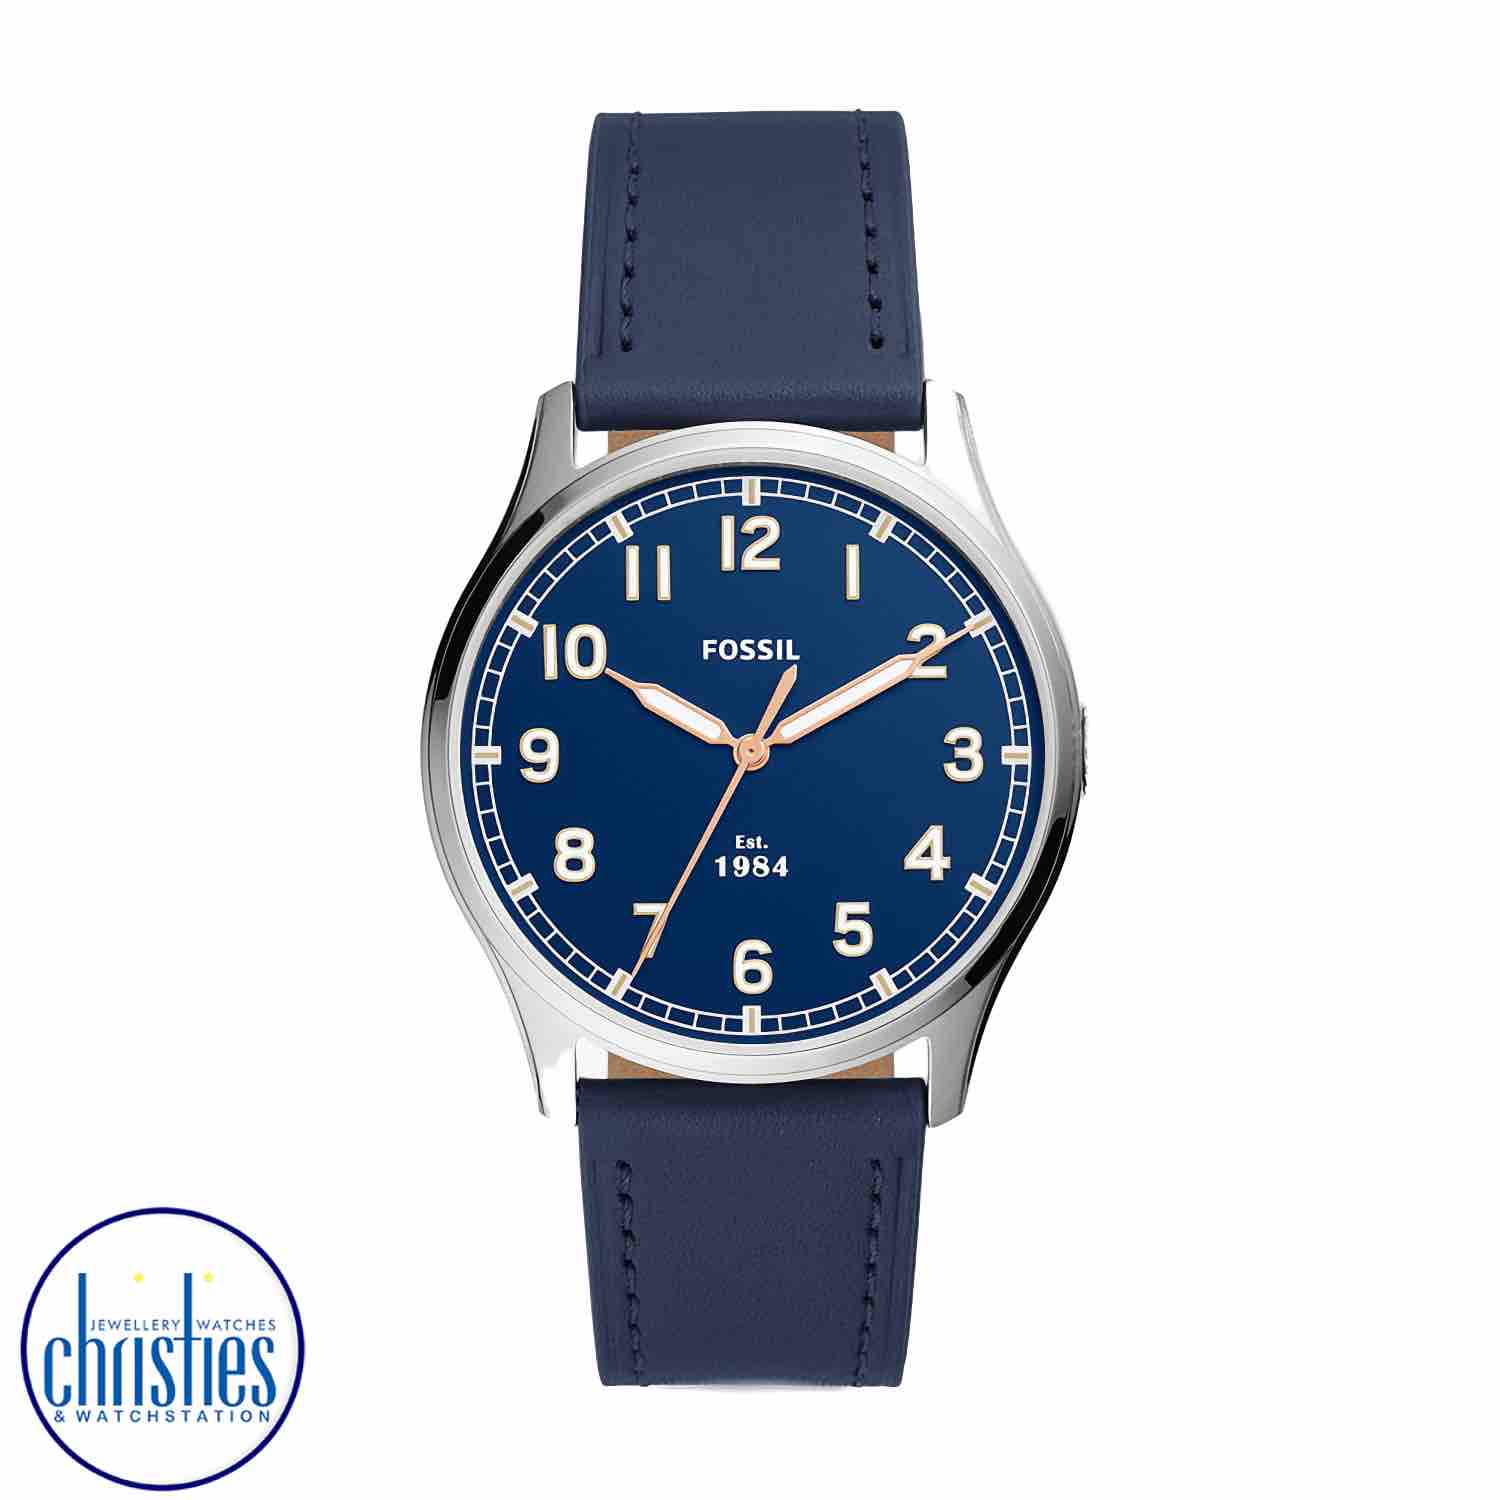 FS5924 Fossil Dayliner Three-Hand Medium Navy Leather Watch. FS5924 Fossil Dayliner Three-Hand Medium Navy Leather Watch Afterpay - Split your purchase into 4 instalments - Pay for your purchase over 4 instalments, due every two weeks. fossil mens watches